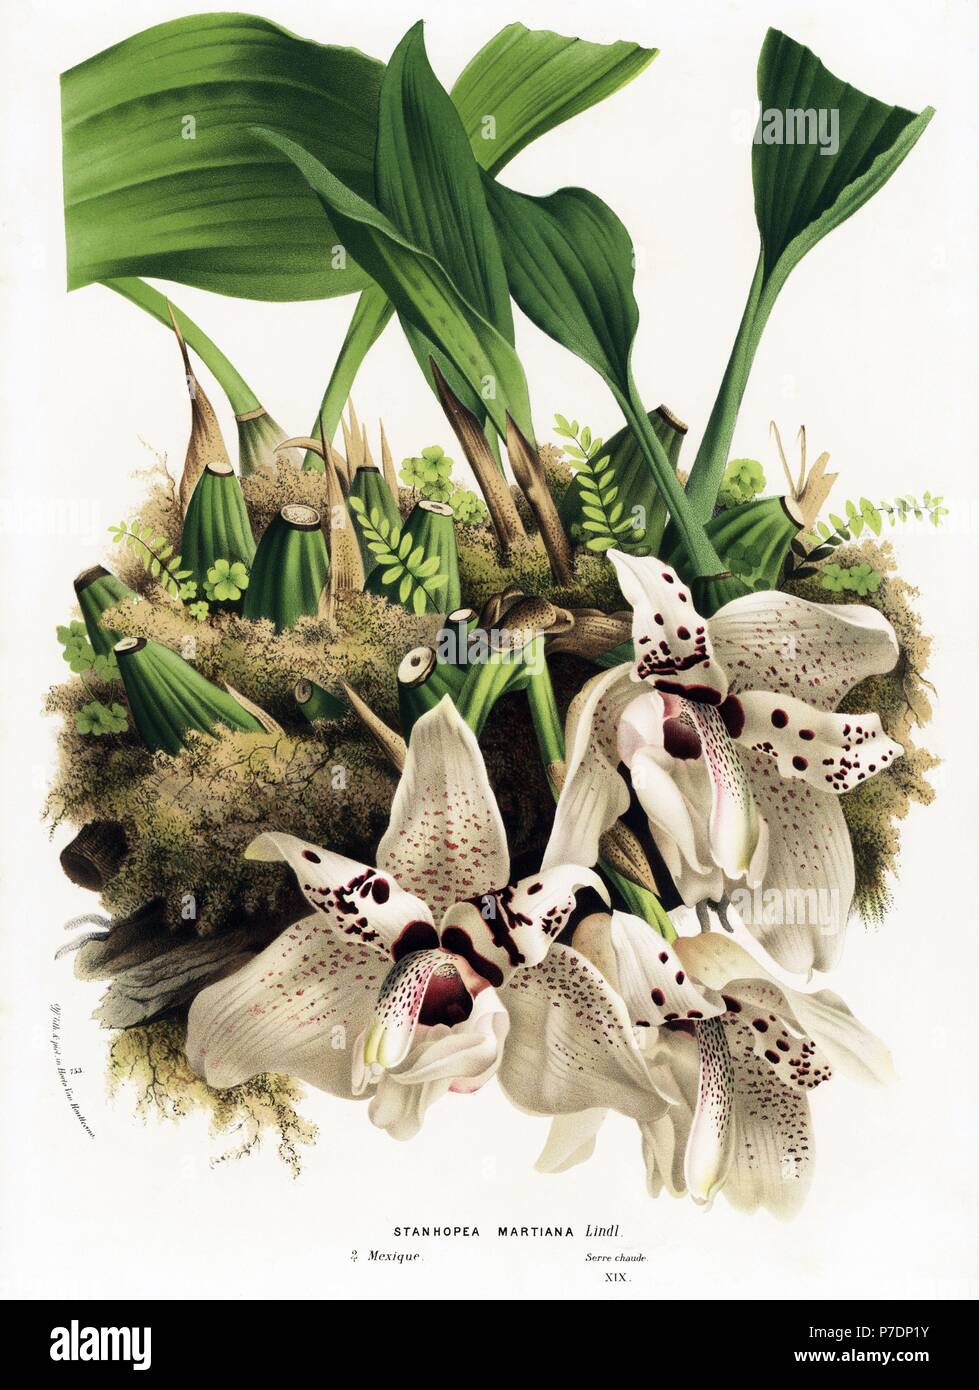 Stanhopea martiana orchid. Native to Mexico. Handcoloured lithograph from Louis van Houtte and Charles Lemaire's Flowers of the Gardens and Hothouses of Europe, Flore des Serres et des Jardins de l'Europe, Ghent, Belgium, 1874. Stock Photo